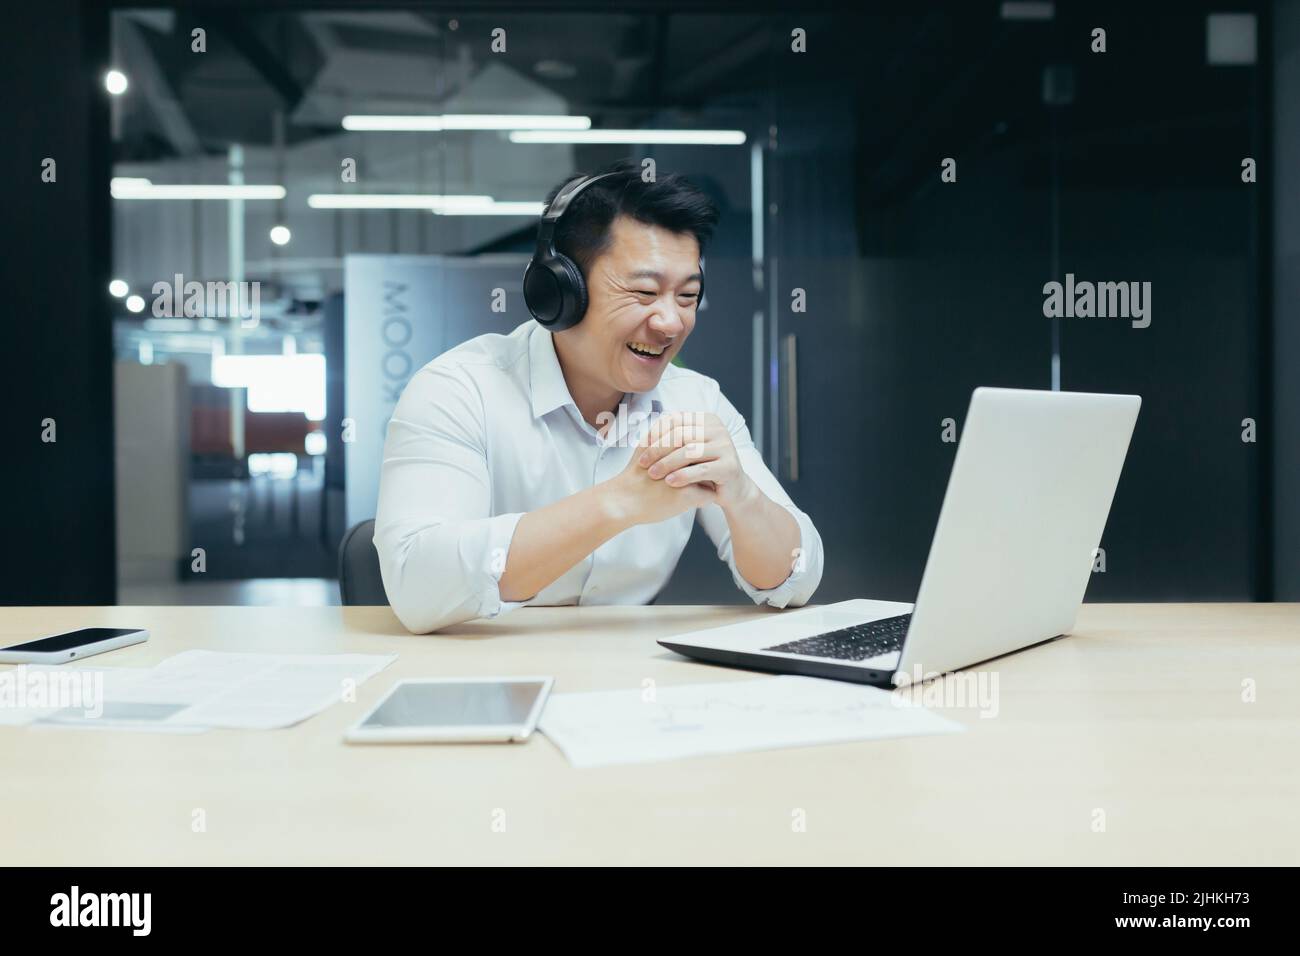 Happy Asian businessman watching sports match online, man in office looking at laptop screen cheerfully cheering Stock Photo